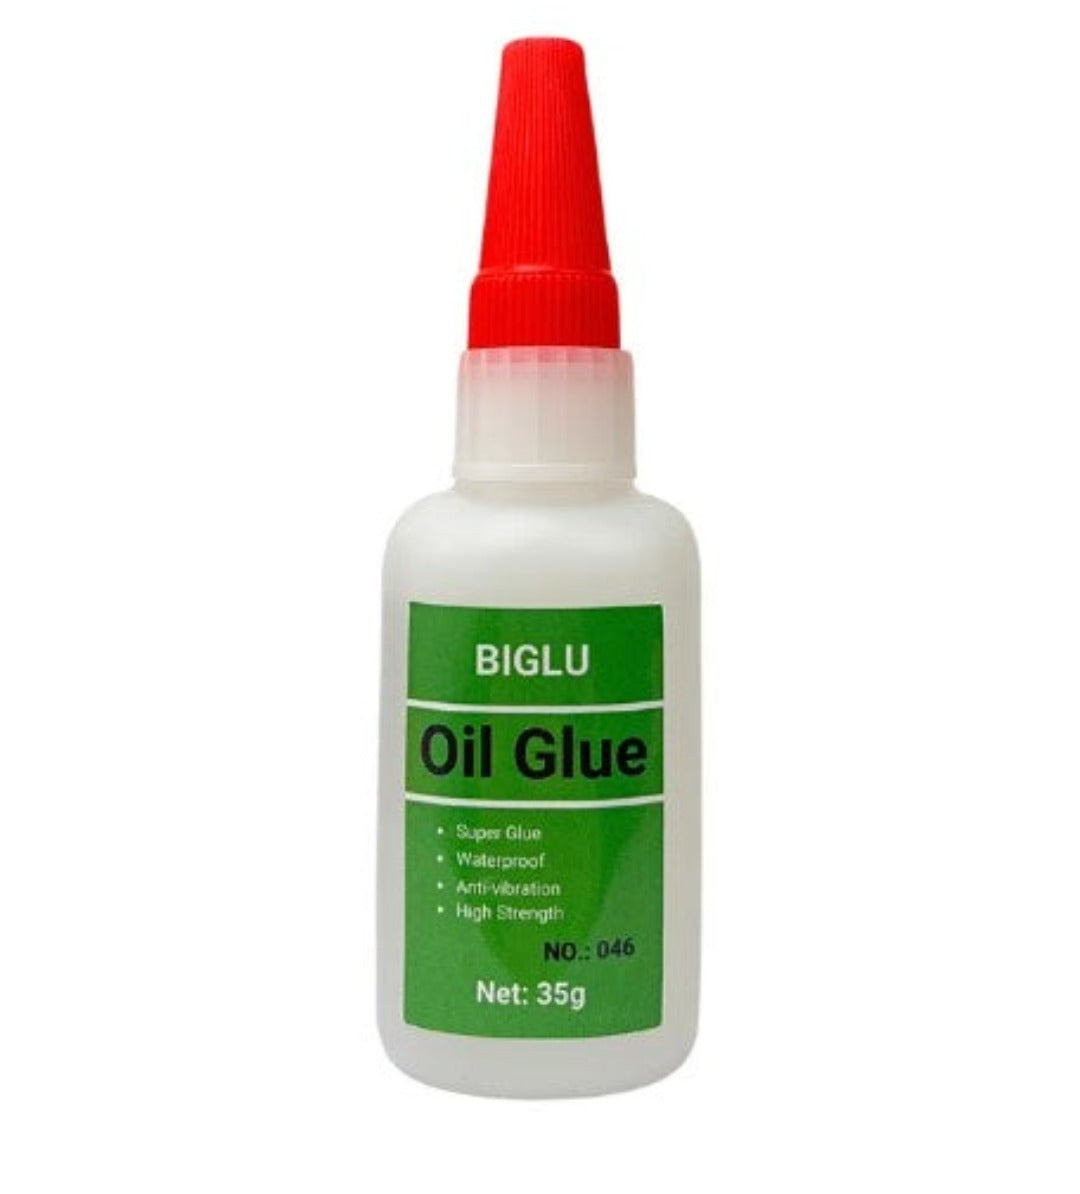 StrongGlue™ - High-strength oil-based adhesive